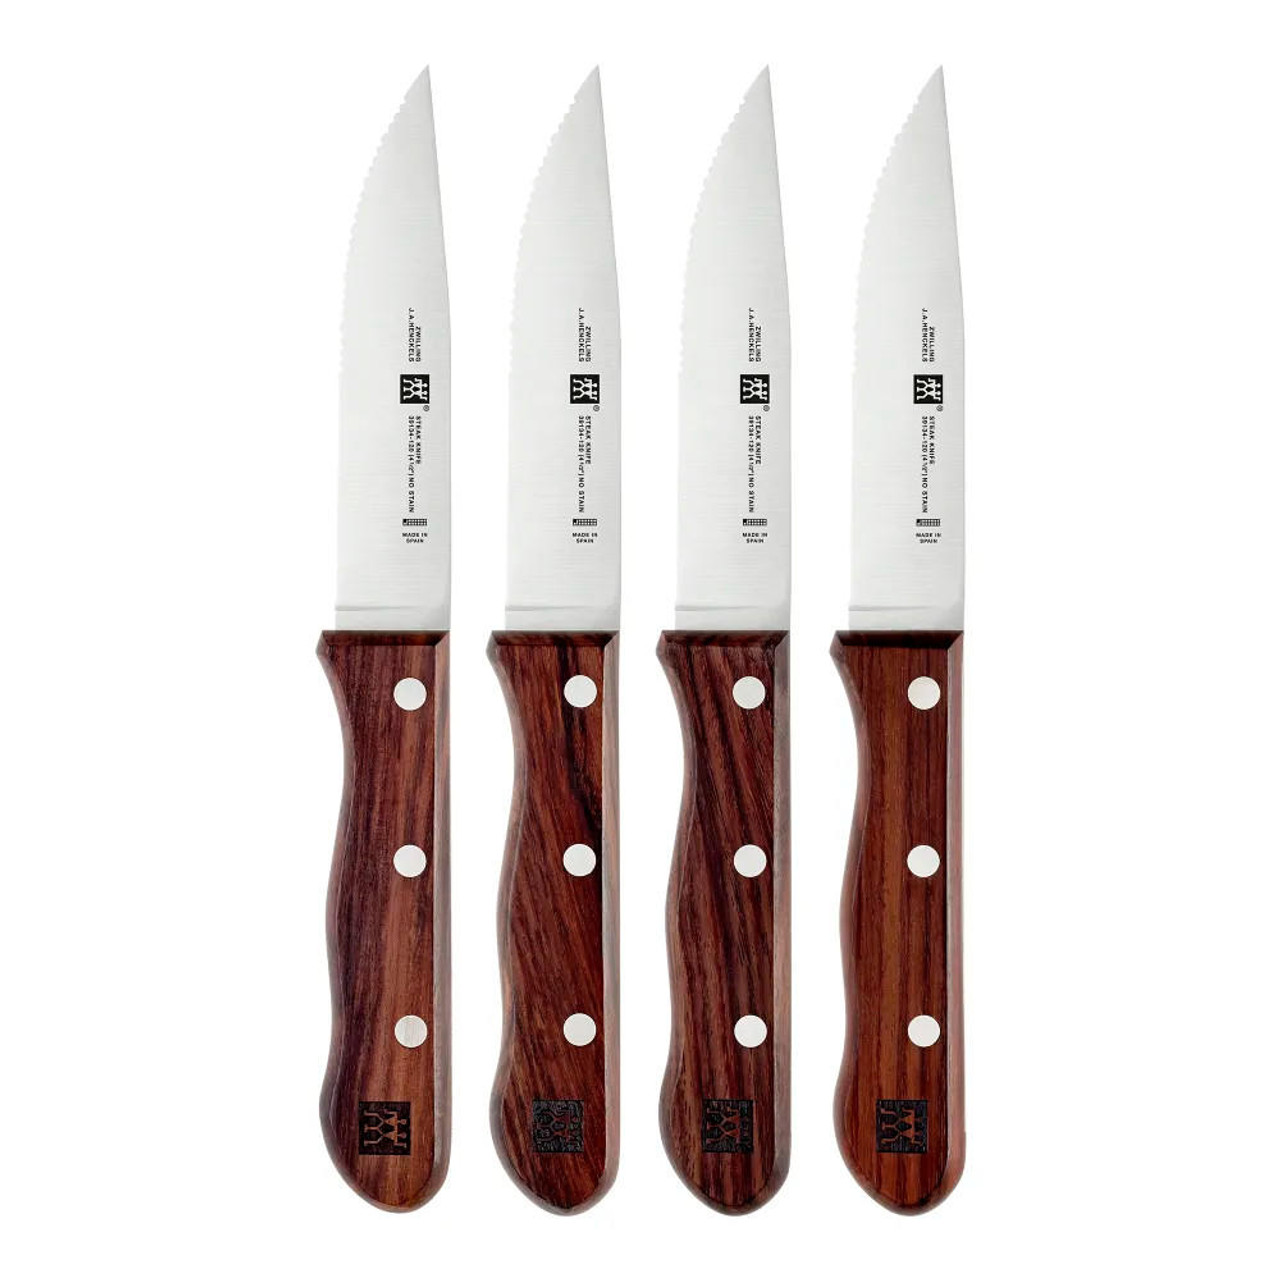 ZWILLING  Zwilling Steakhouse 4 Piece Steak Knife Set with Storage Case - 4-1/2" 